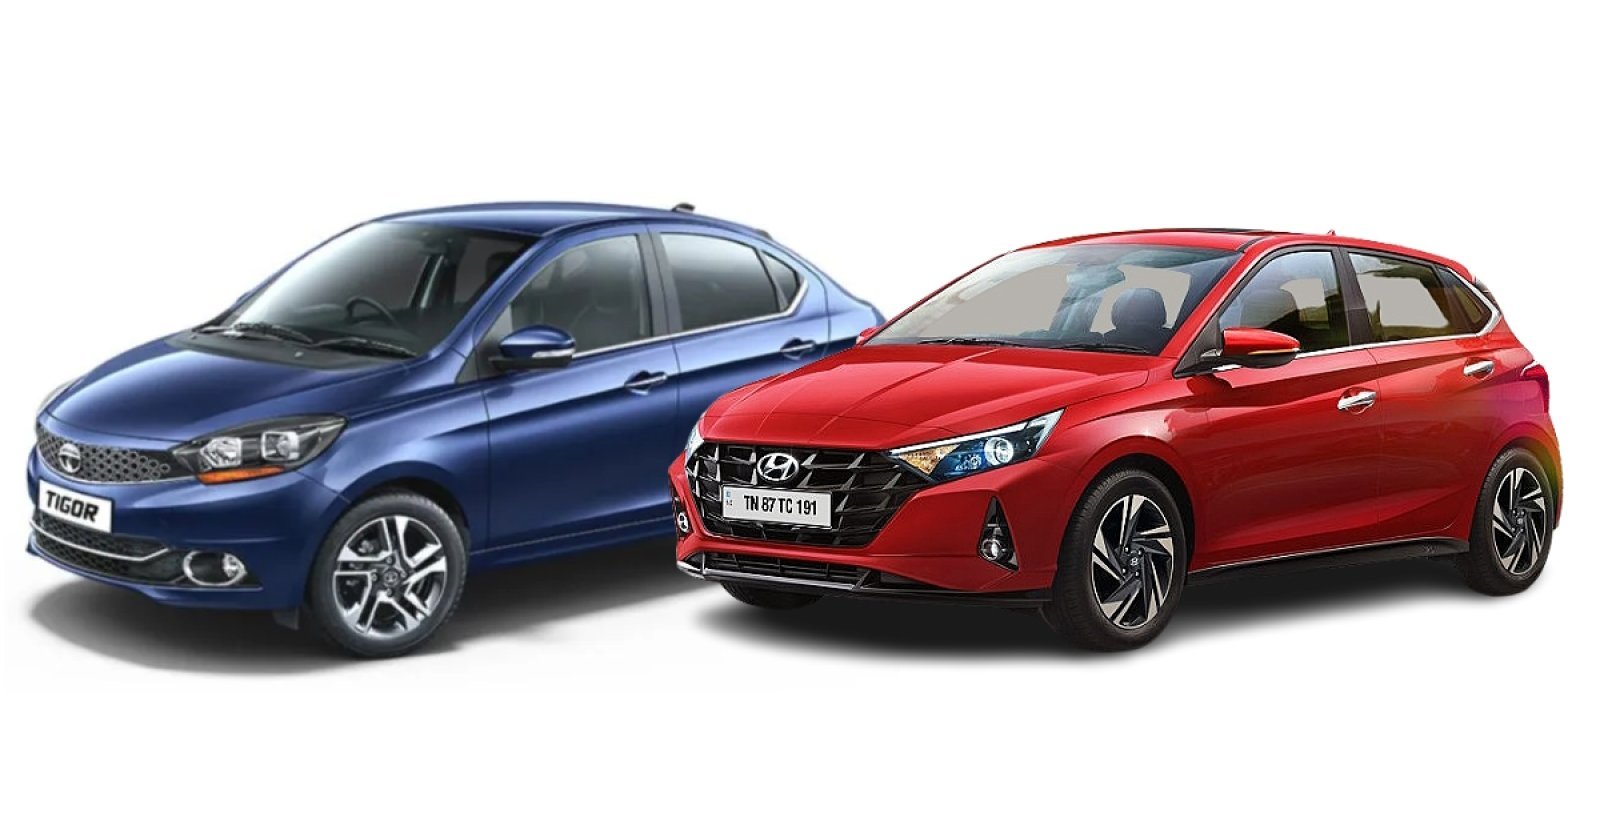 Cars equipped with great safety features come for Rs 10 lakh, ranging from Hyundai to Tata